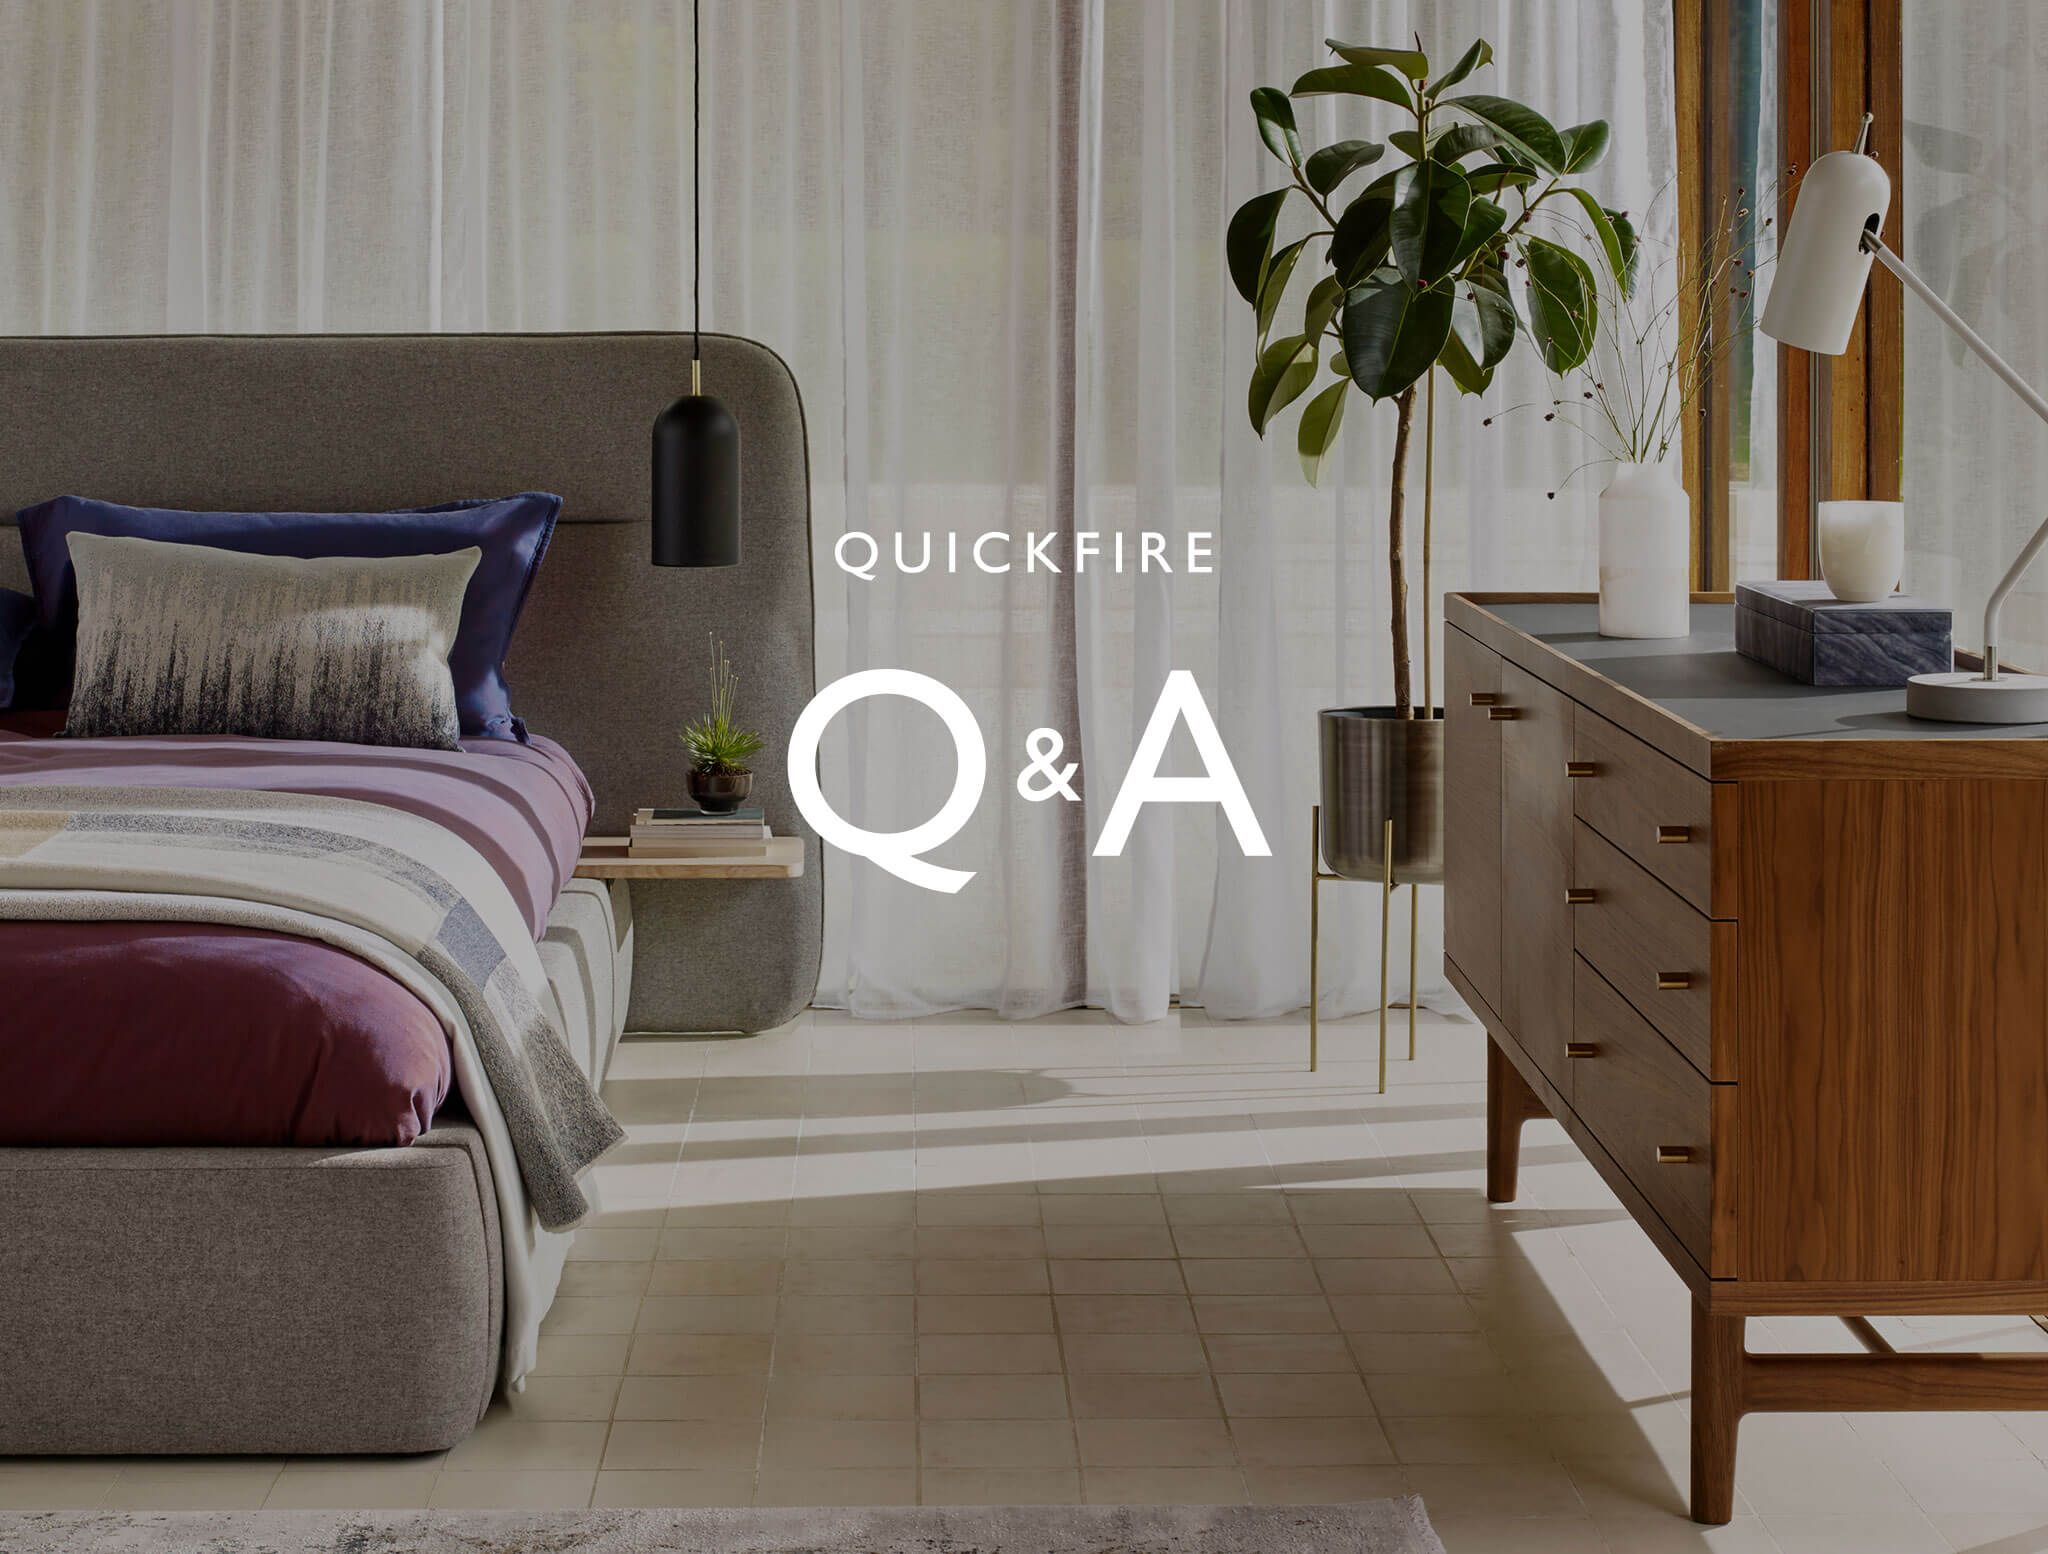 Design Project by John Lewis Q&A